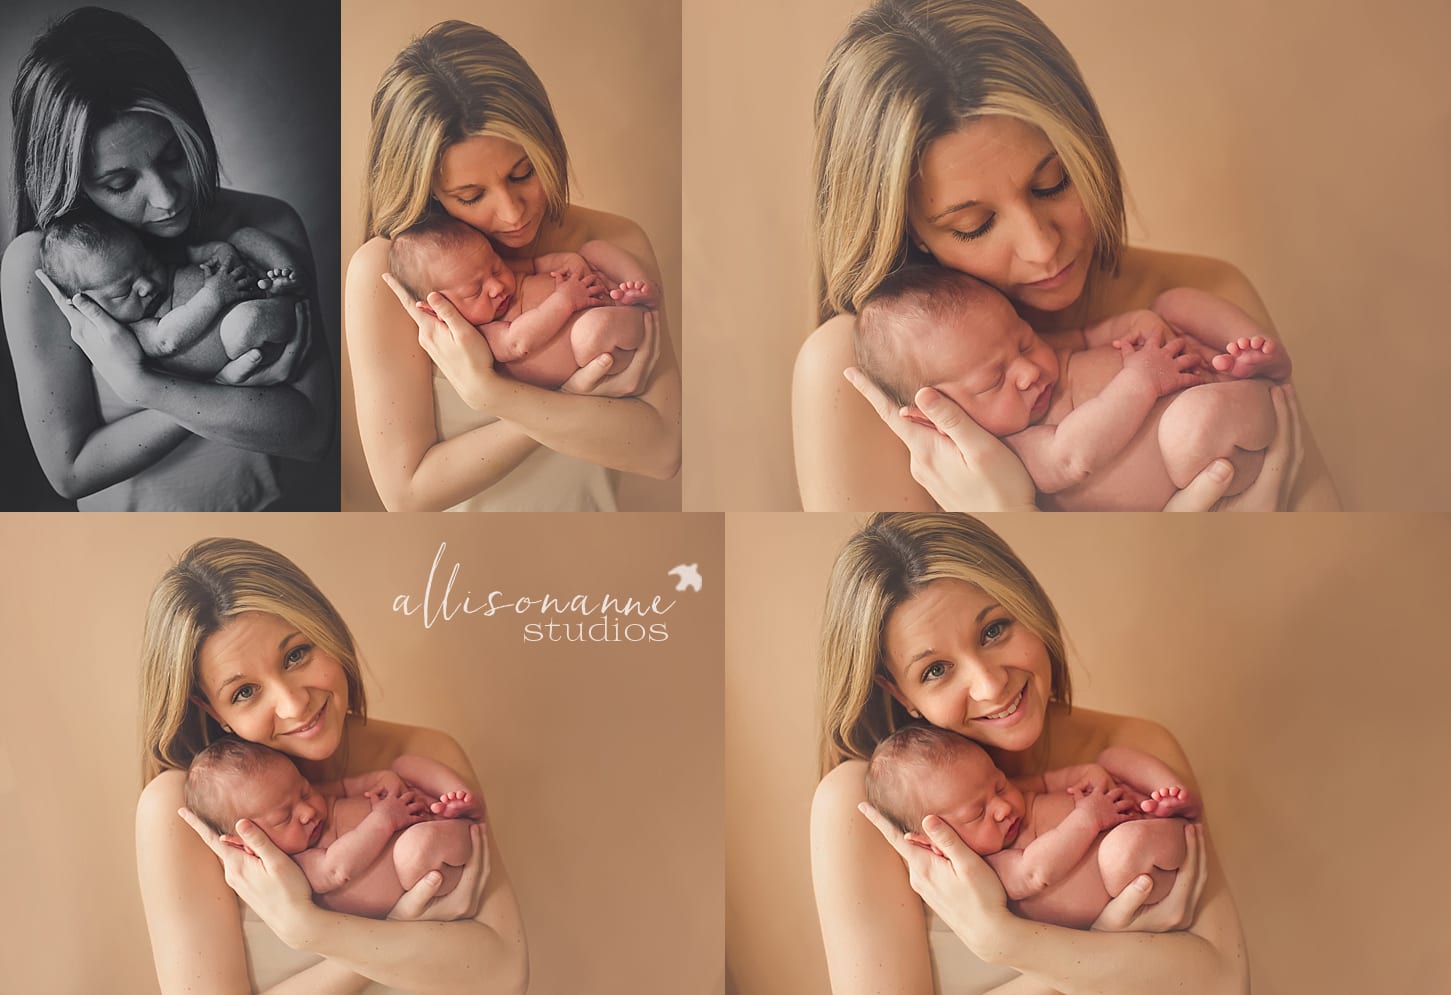 early, premie, Ellie, Petite Boutique, Luxe Hues, cream, neutrals, 20 days old, newborn sessions, studio sessions, Hammonton, best photographer South Jersey, AllisonAnne Studios, Allison Gallagher, love, baby